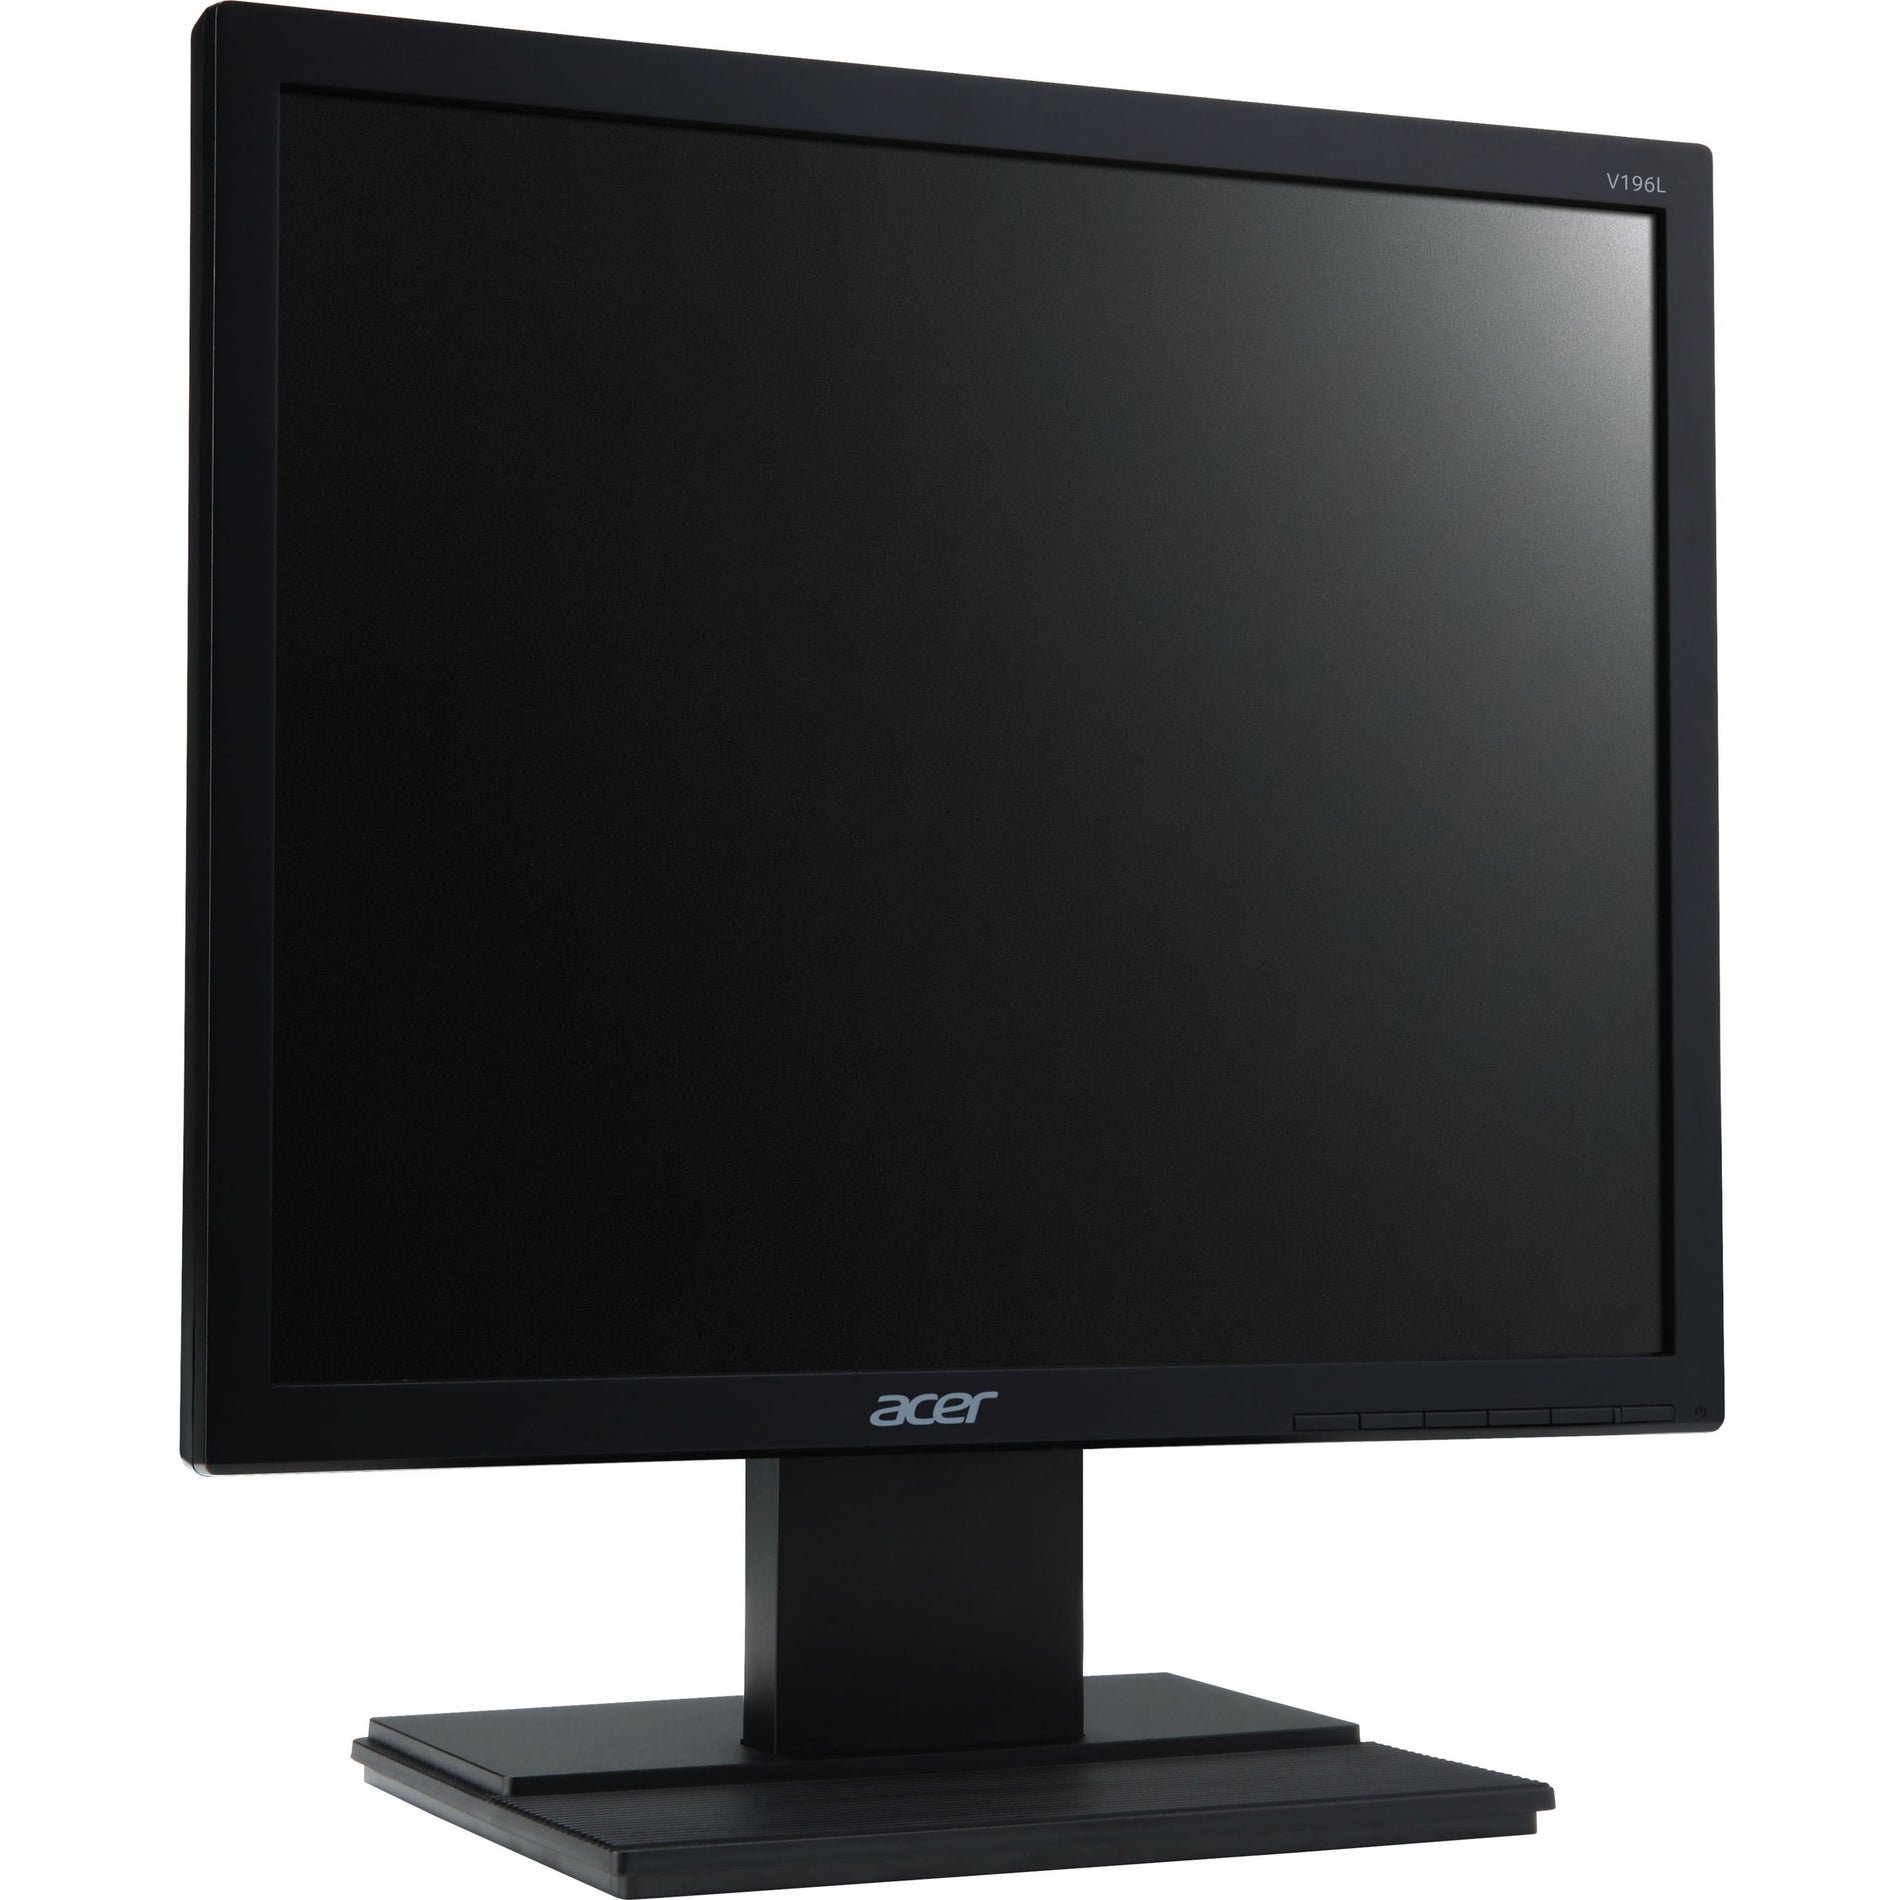 Acer UM.CV6AA.B01 V196L LCD Monitor, 19" 5:4 5ms 250 Nit LED, VGA DVI, Speakers, TCO Certified [Discontinued]